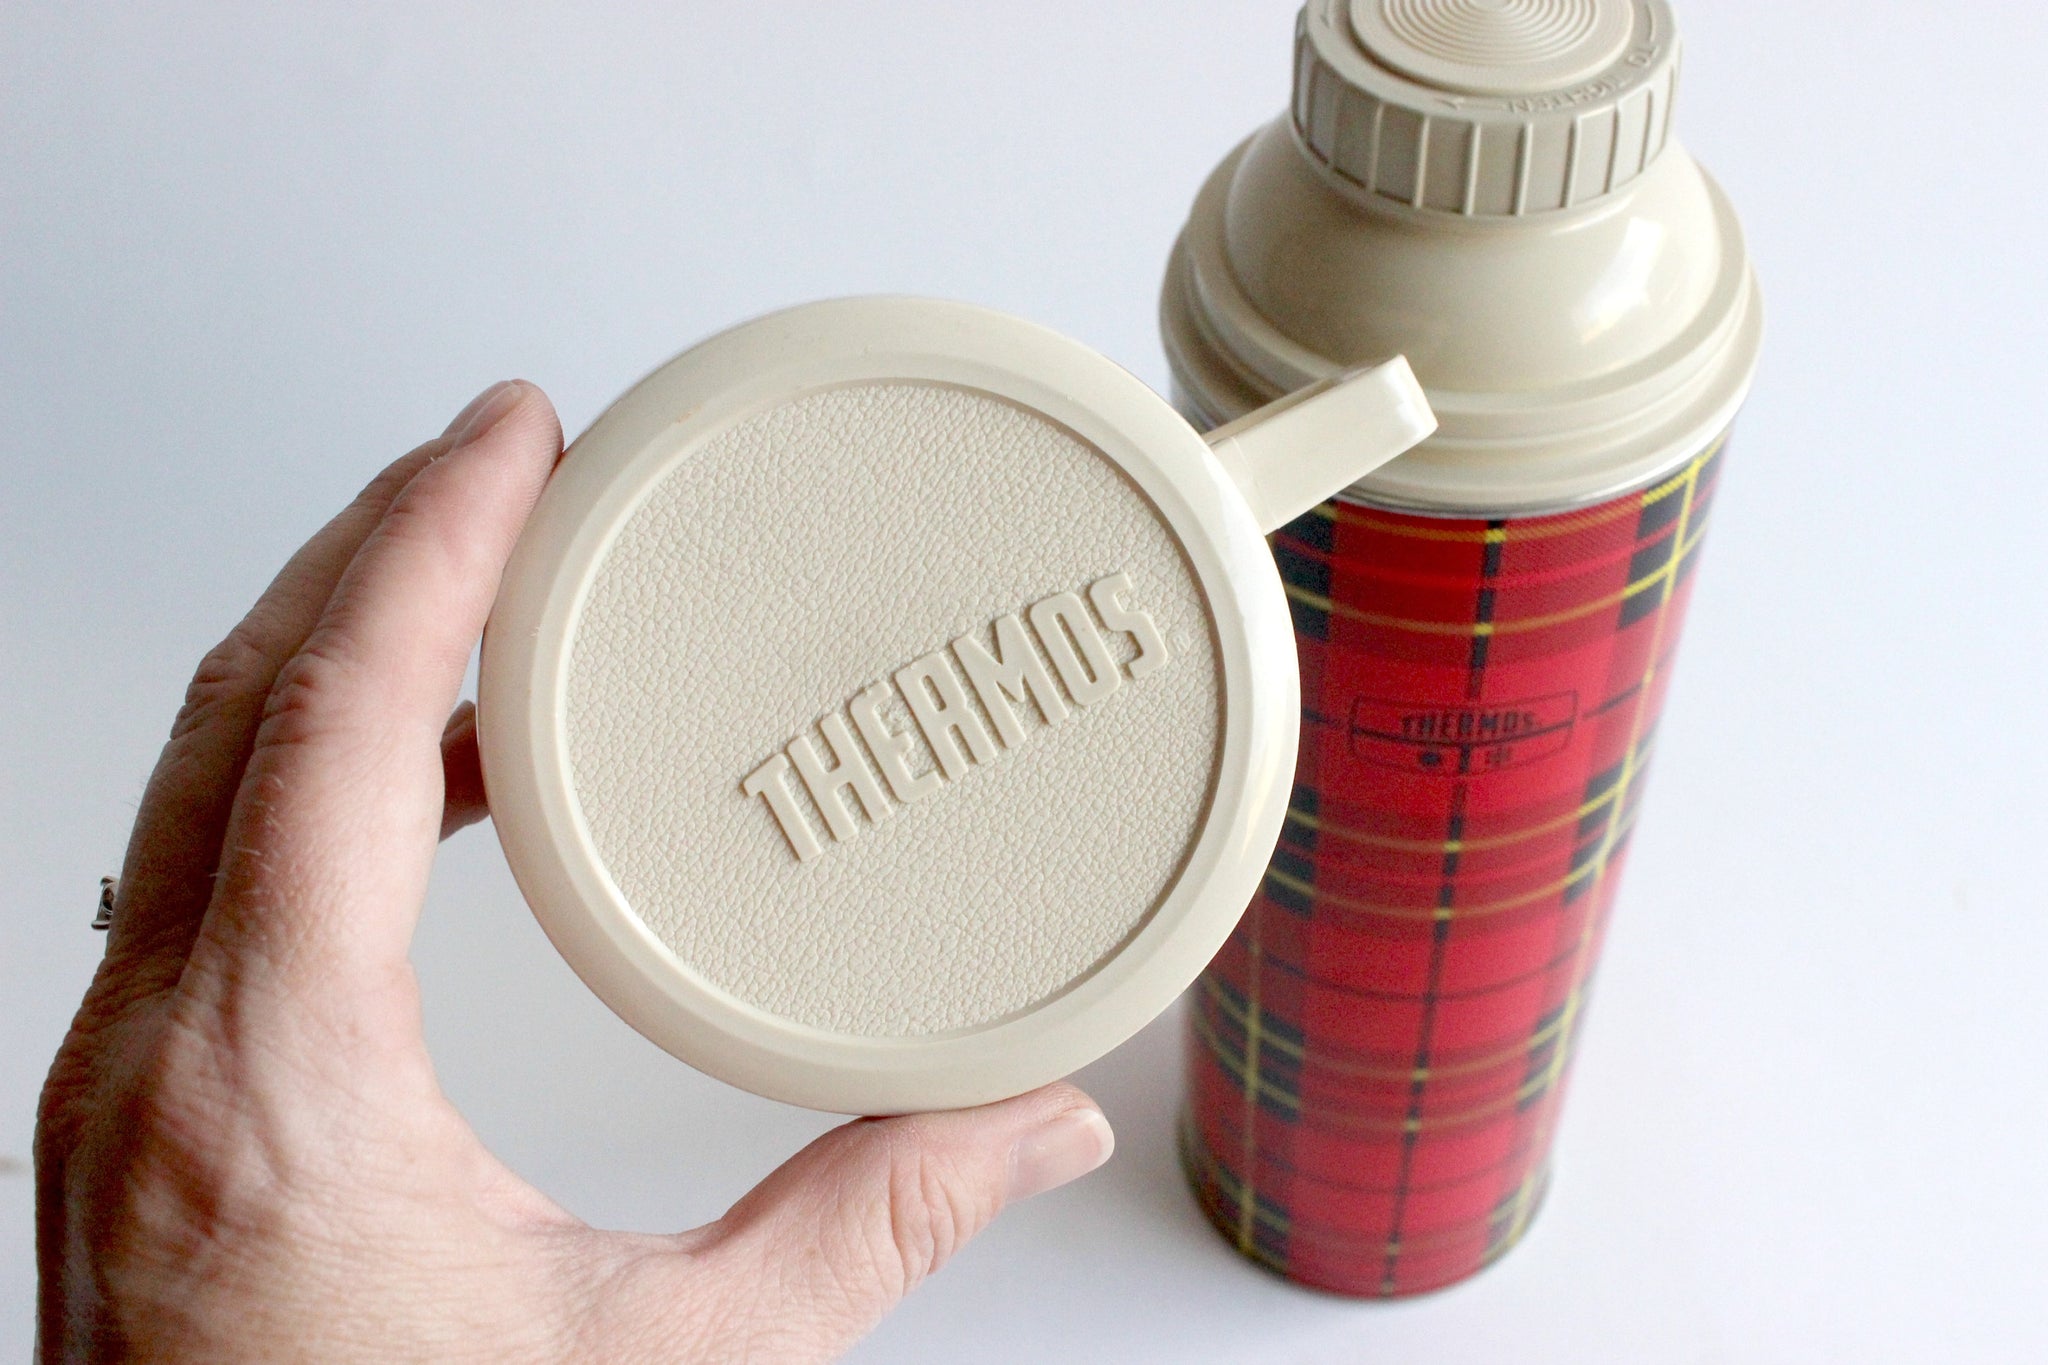 Vintage Thermos An Old Retro Plaid Thermos In The Hands Of A Child